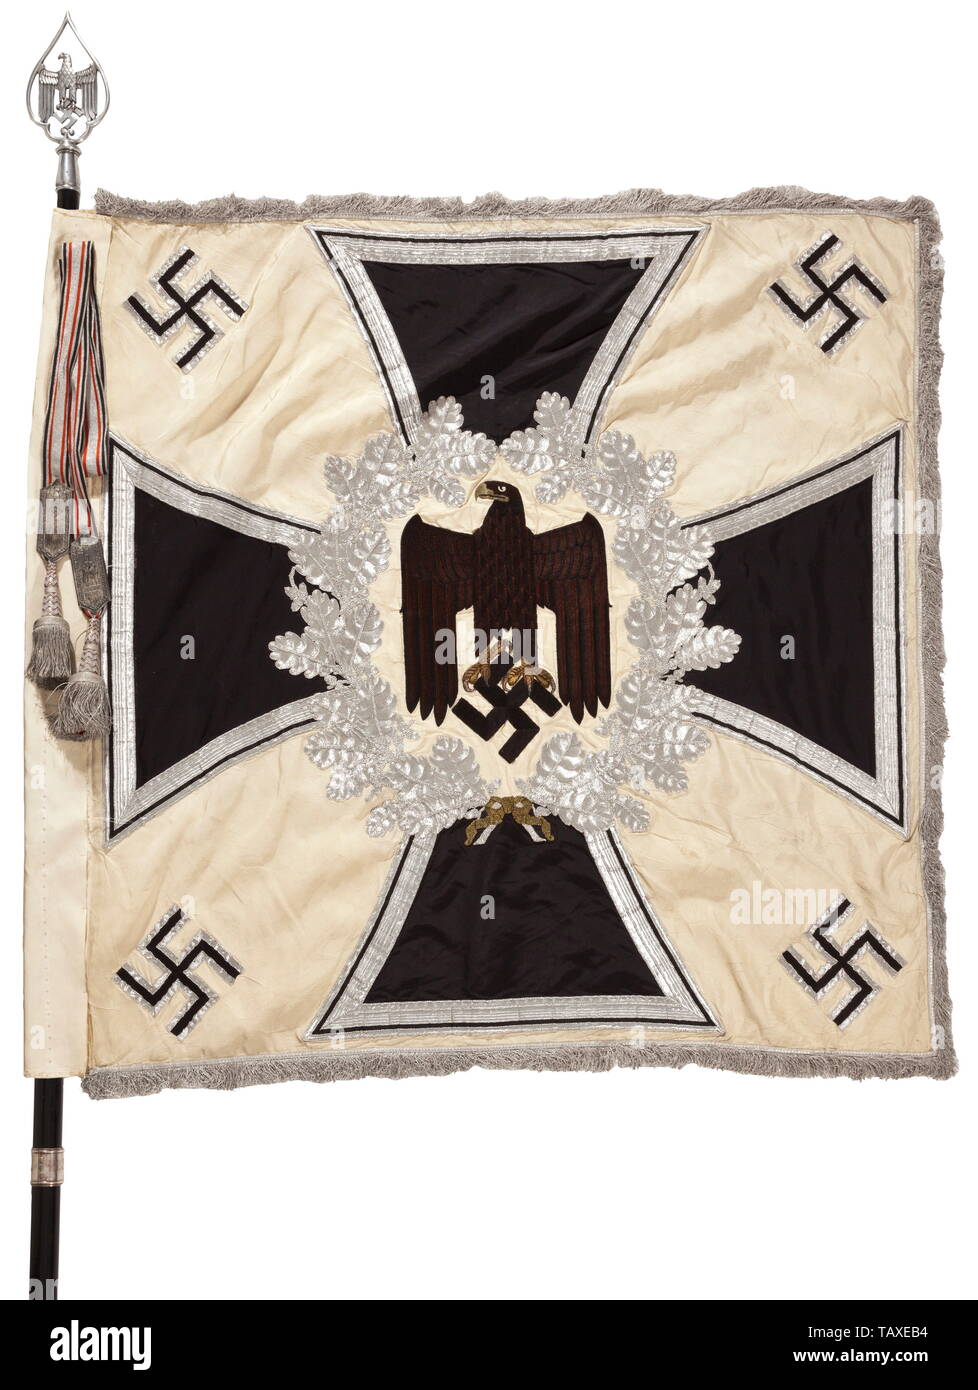 A battalion flag of III Battalion Infantry Regiment 52, complete with pole, finial and banderole, White silk cloth fringed with silver on three edges. On both sides a hand-embroidered black army eagle with brown plumage, the beak and talons in raised gold embroidery on a field of cream-coloured silk, surrounded by a silver embroidered wreath of oak leaves on an Iron Cross, in the corners four applied swastikas. Dimensions ca. 120 x 120 cm. The black polished wooden flagpole with engraved silvered battalion ring. The attachment nails (tarnished) w, Additional-Rights-Clearance-Info-Not-Available Stock Photo